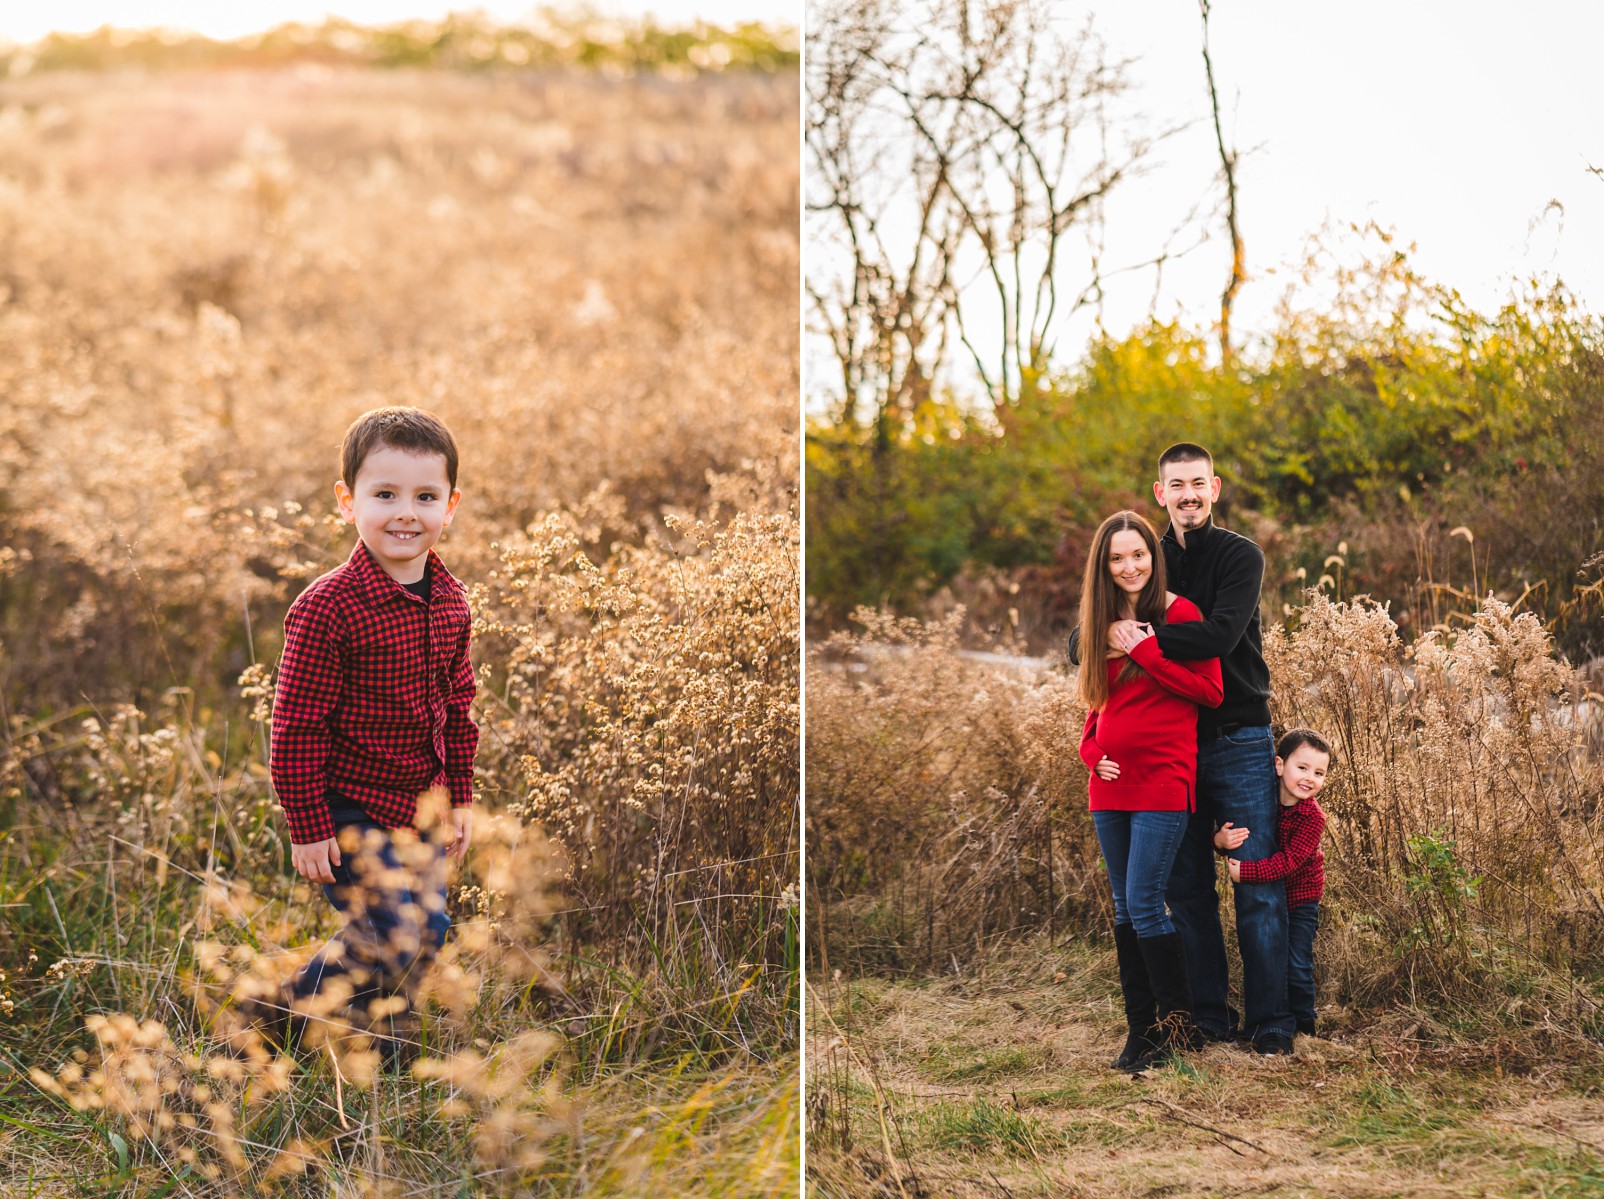 Russ Nature Reserve | Dayton Photo Session Locations 